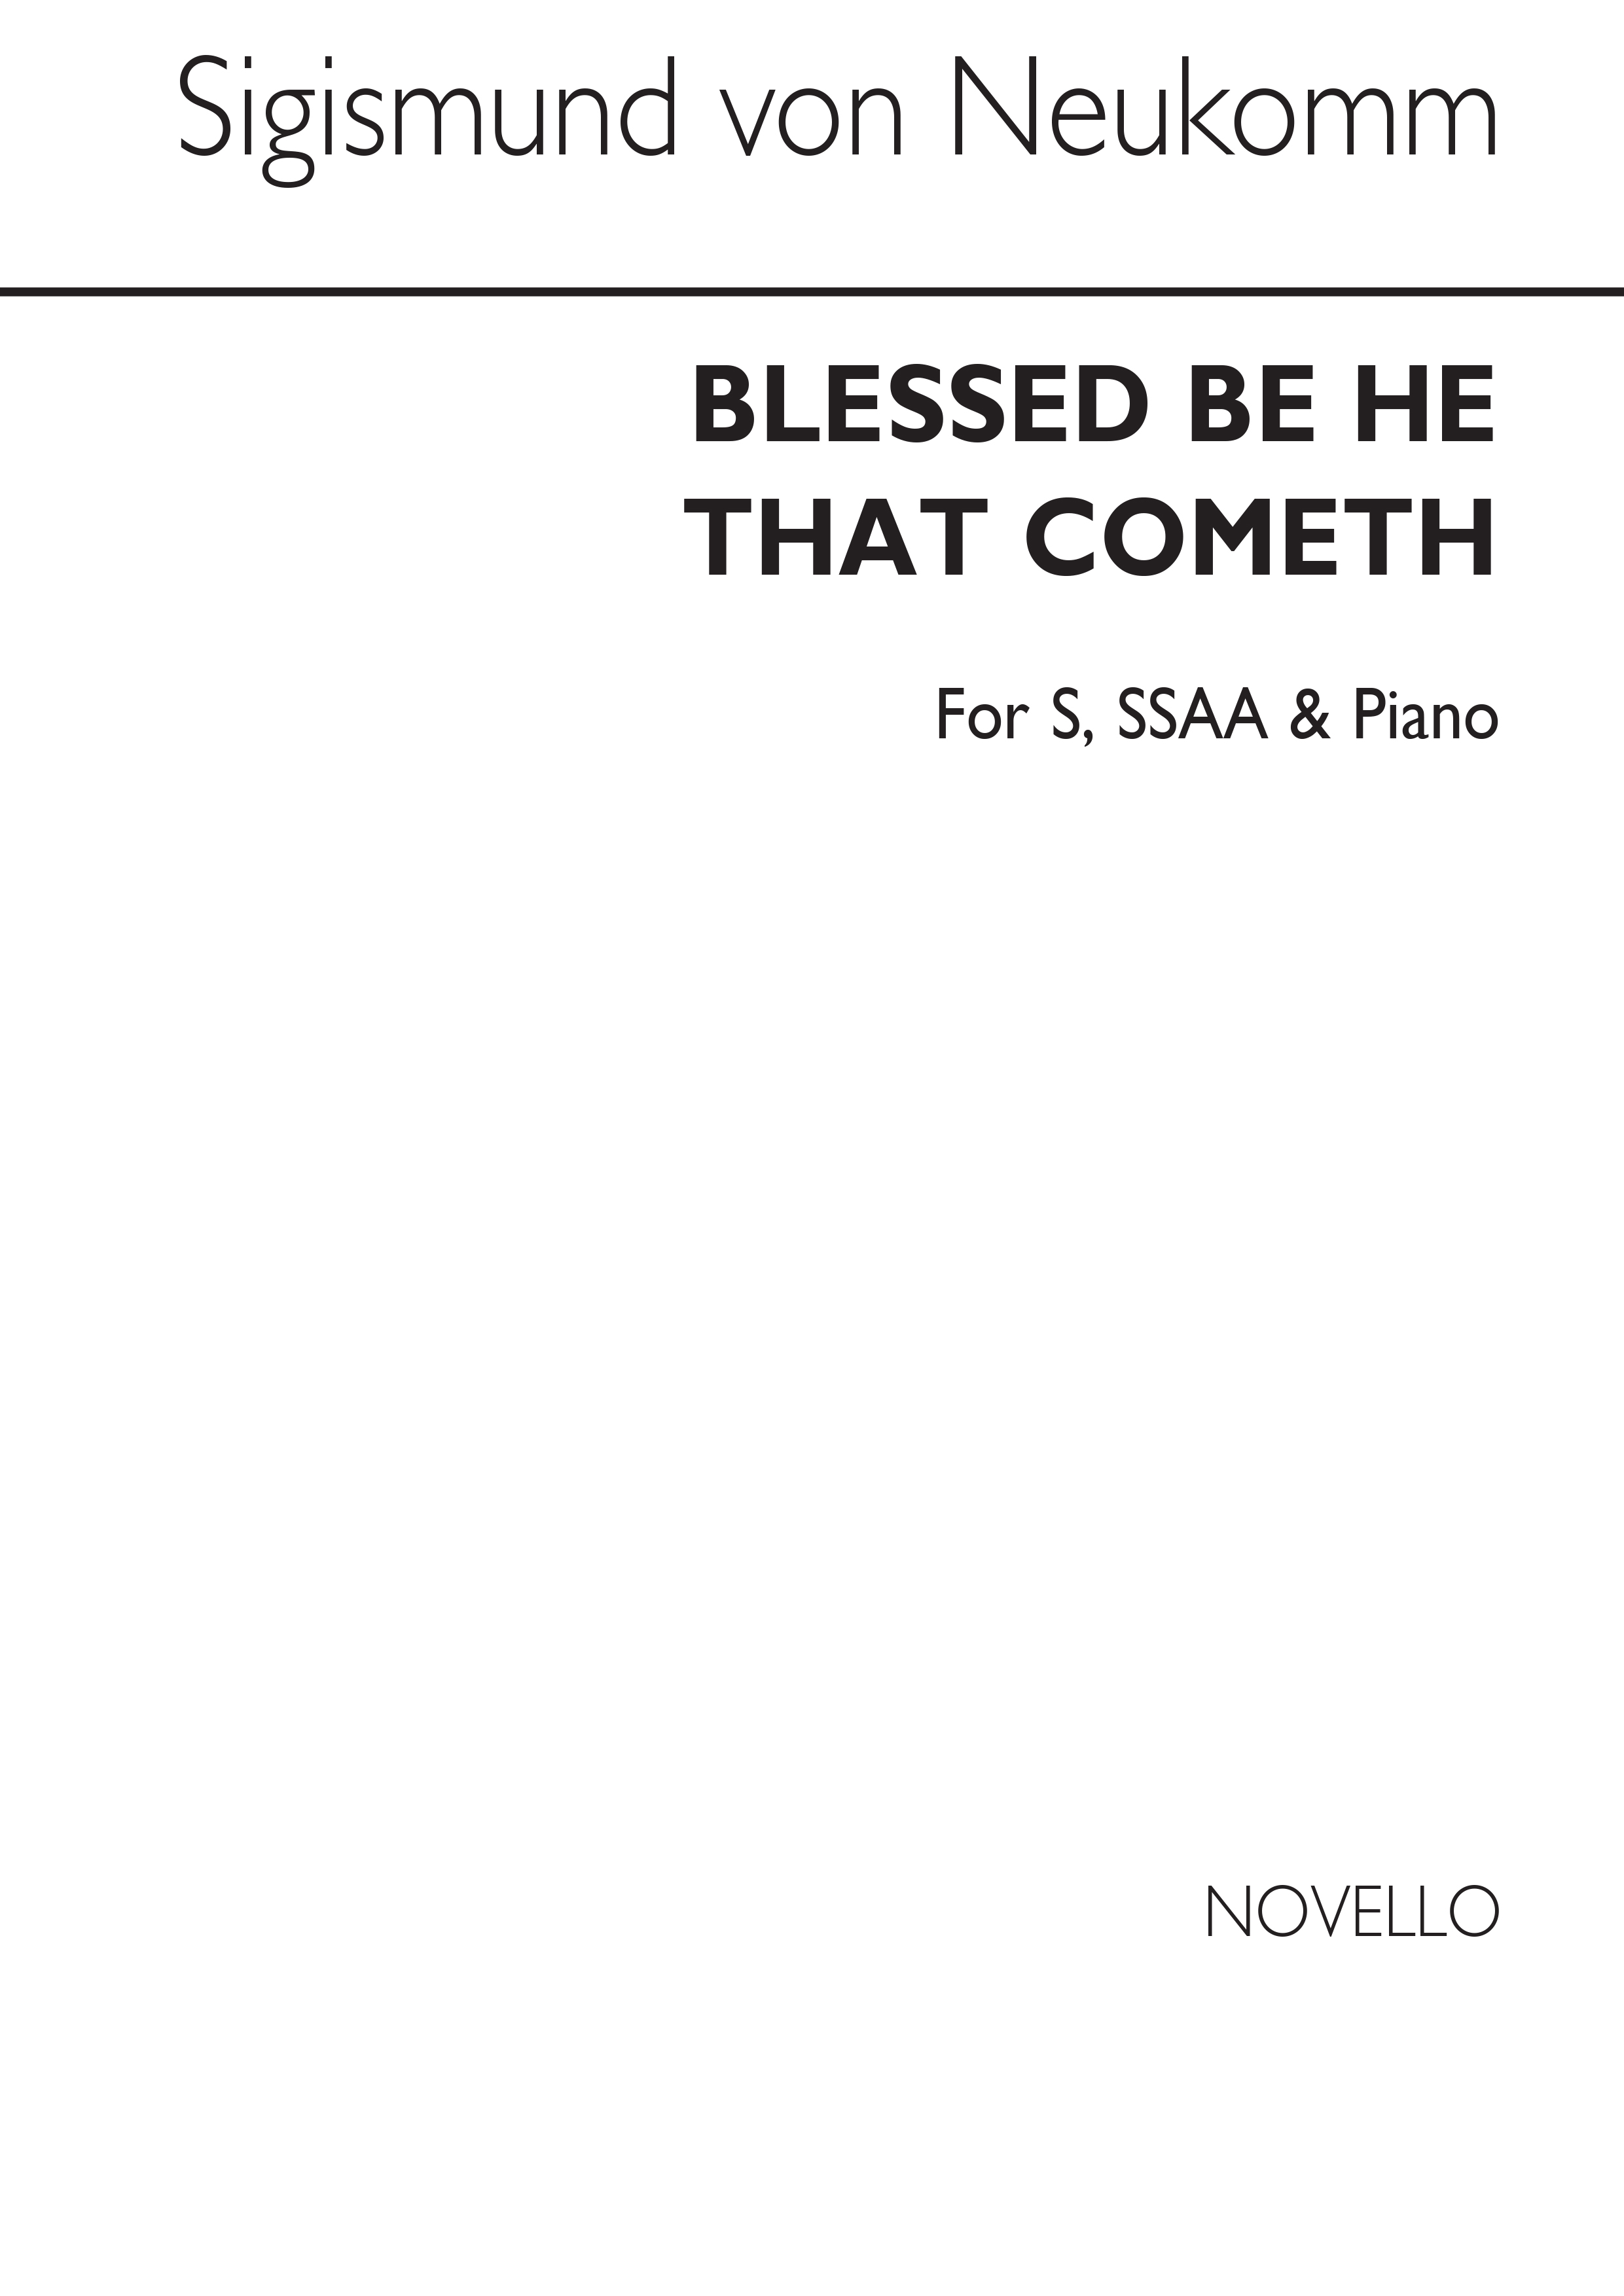 Sigismund Neukomm: Blessed Be He That Cometh S/Ssaa/Piano